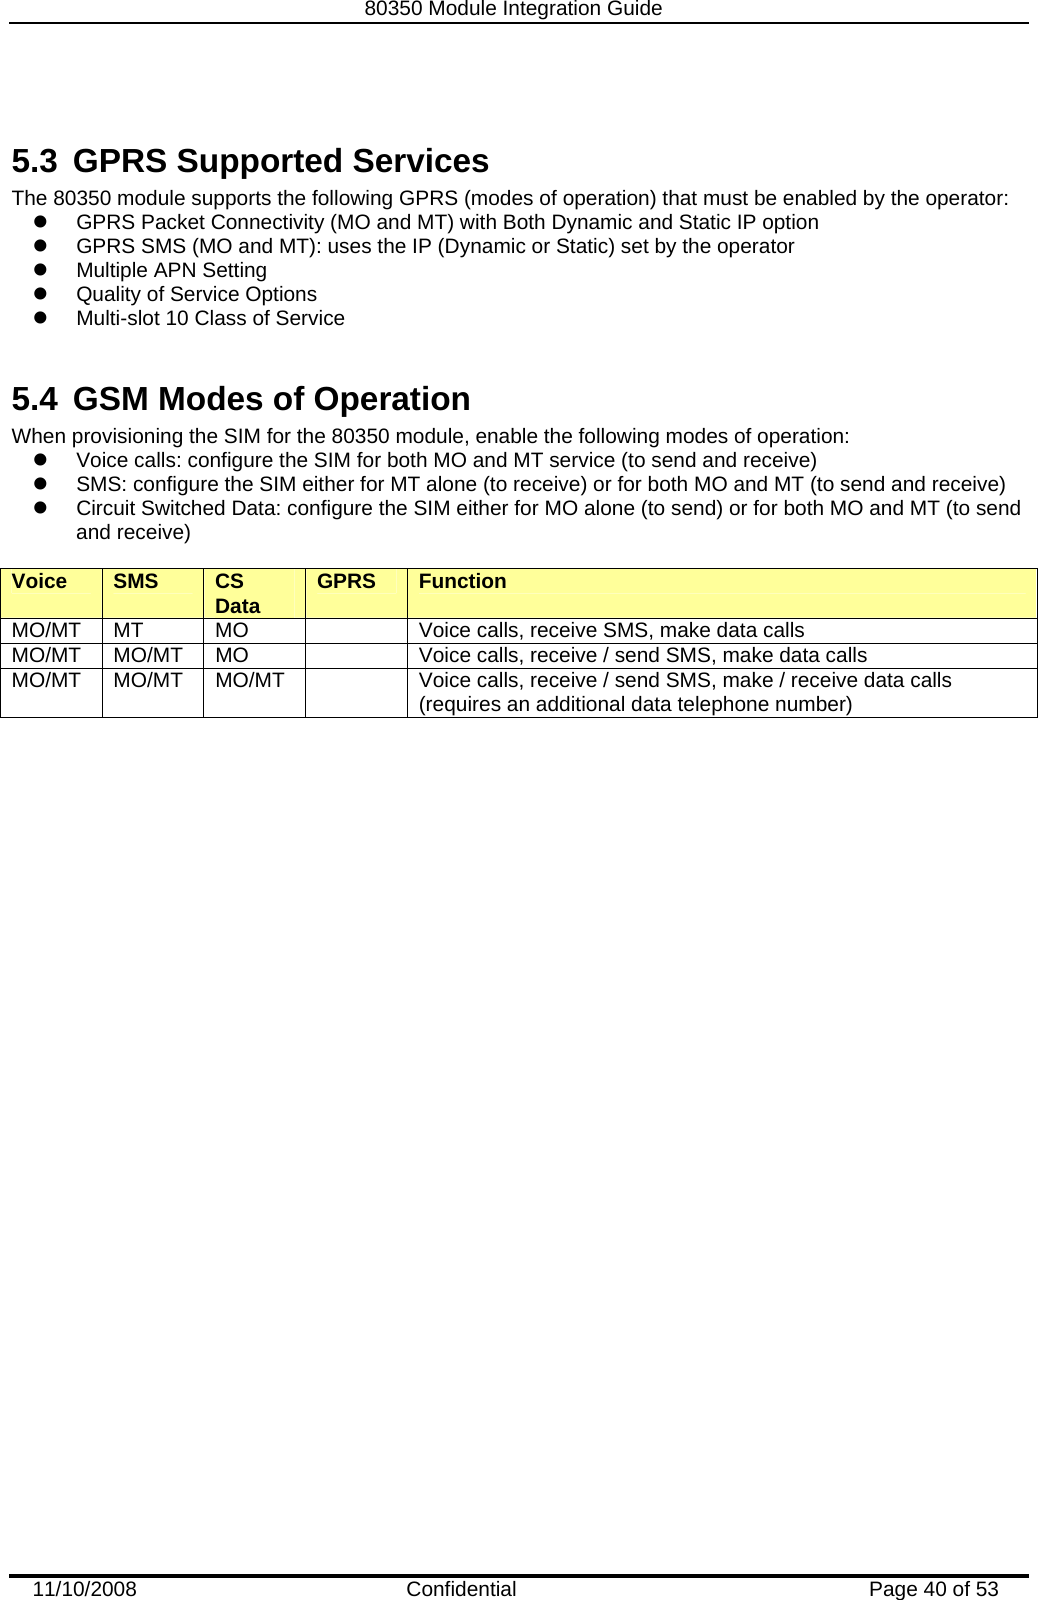   80350 Module Integration Guide  11/10/2008    Confidential  Page 40 of 53  5.3  GPRS Supported Services The 80350 module supports the following GPRS (modes of operation) that must be enabled by the operator: z  GPRS Packet Connectivity (MO and MT) with Both Dynamic and Static IP option z  GPRS SMS (MO and MT): uses the IP (Dynamic or Static) set by the operator z  Multiple APN Setting z  Quality of Service Options z  Multi-slot 10 Class of Service  5.4  GSM Modes of Operation When provisioning the SIM for the 80350 module, enable the following modes of operation: z  Voice calls: configure the SIM for both MO and MT service (to send and receive) z  SMS: configure the SIM either for MT alone (to receive) or for both MO and MT (to send and receive) z  Circuit Switched Data: configure the SIM either for MO alone (to send) or for both MO and MT (to send and receive)  Voice  SMS  CS Data  GPRS  Function MO/MT  MT  MO    Voice calls, receive SMS, make data calls MO/MT  MO/MT  MO    Voice calls, receive / send SMS, make data calls MO/MT MO/MT MO/MT   Voice calls, receive / send SMS, make / receive data calls (requires an additional data telephone number) 